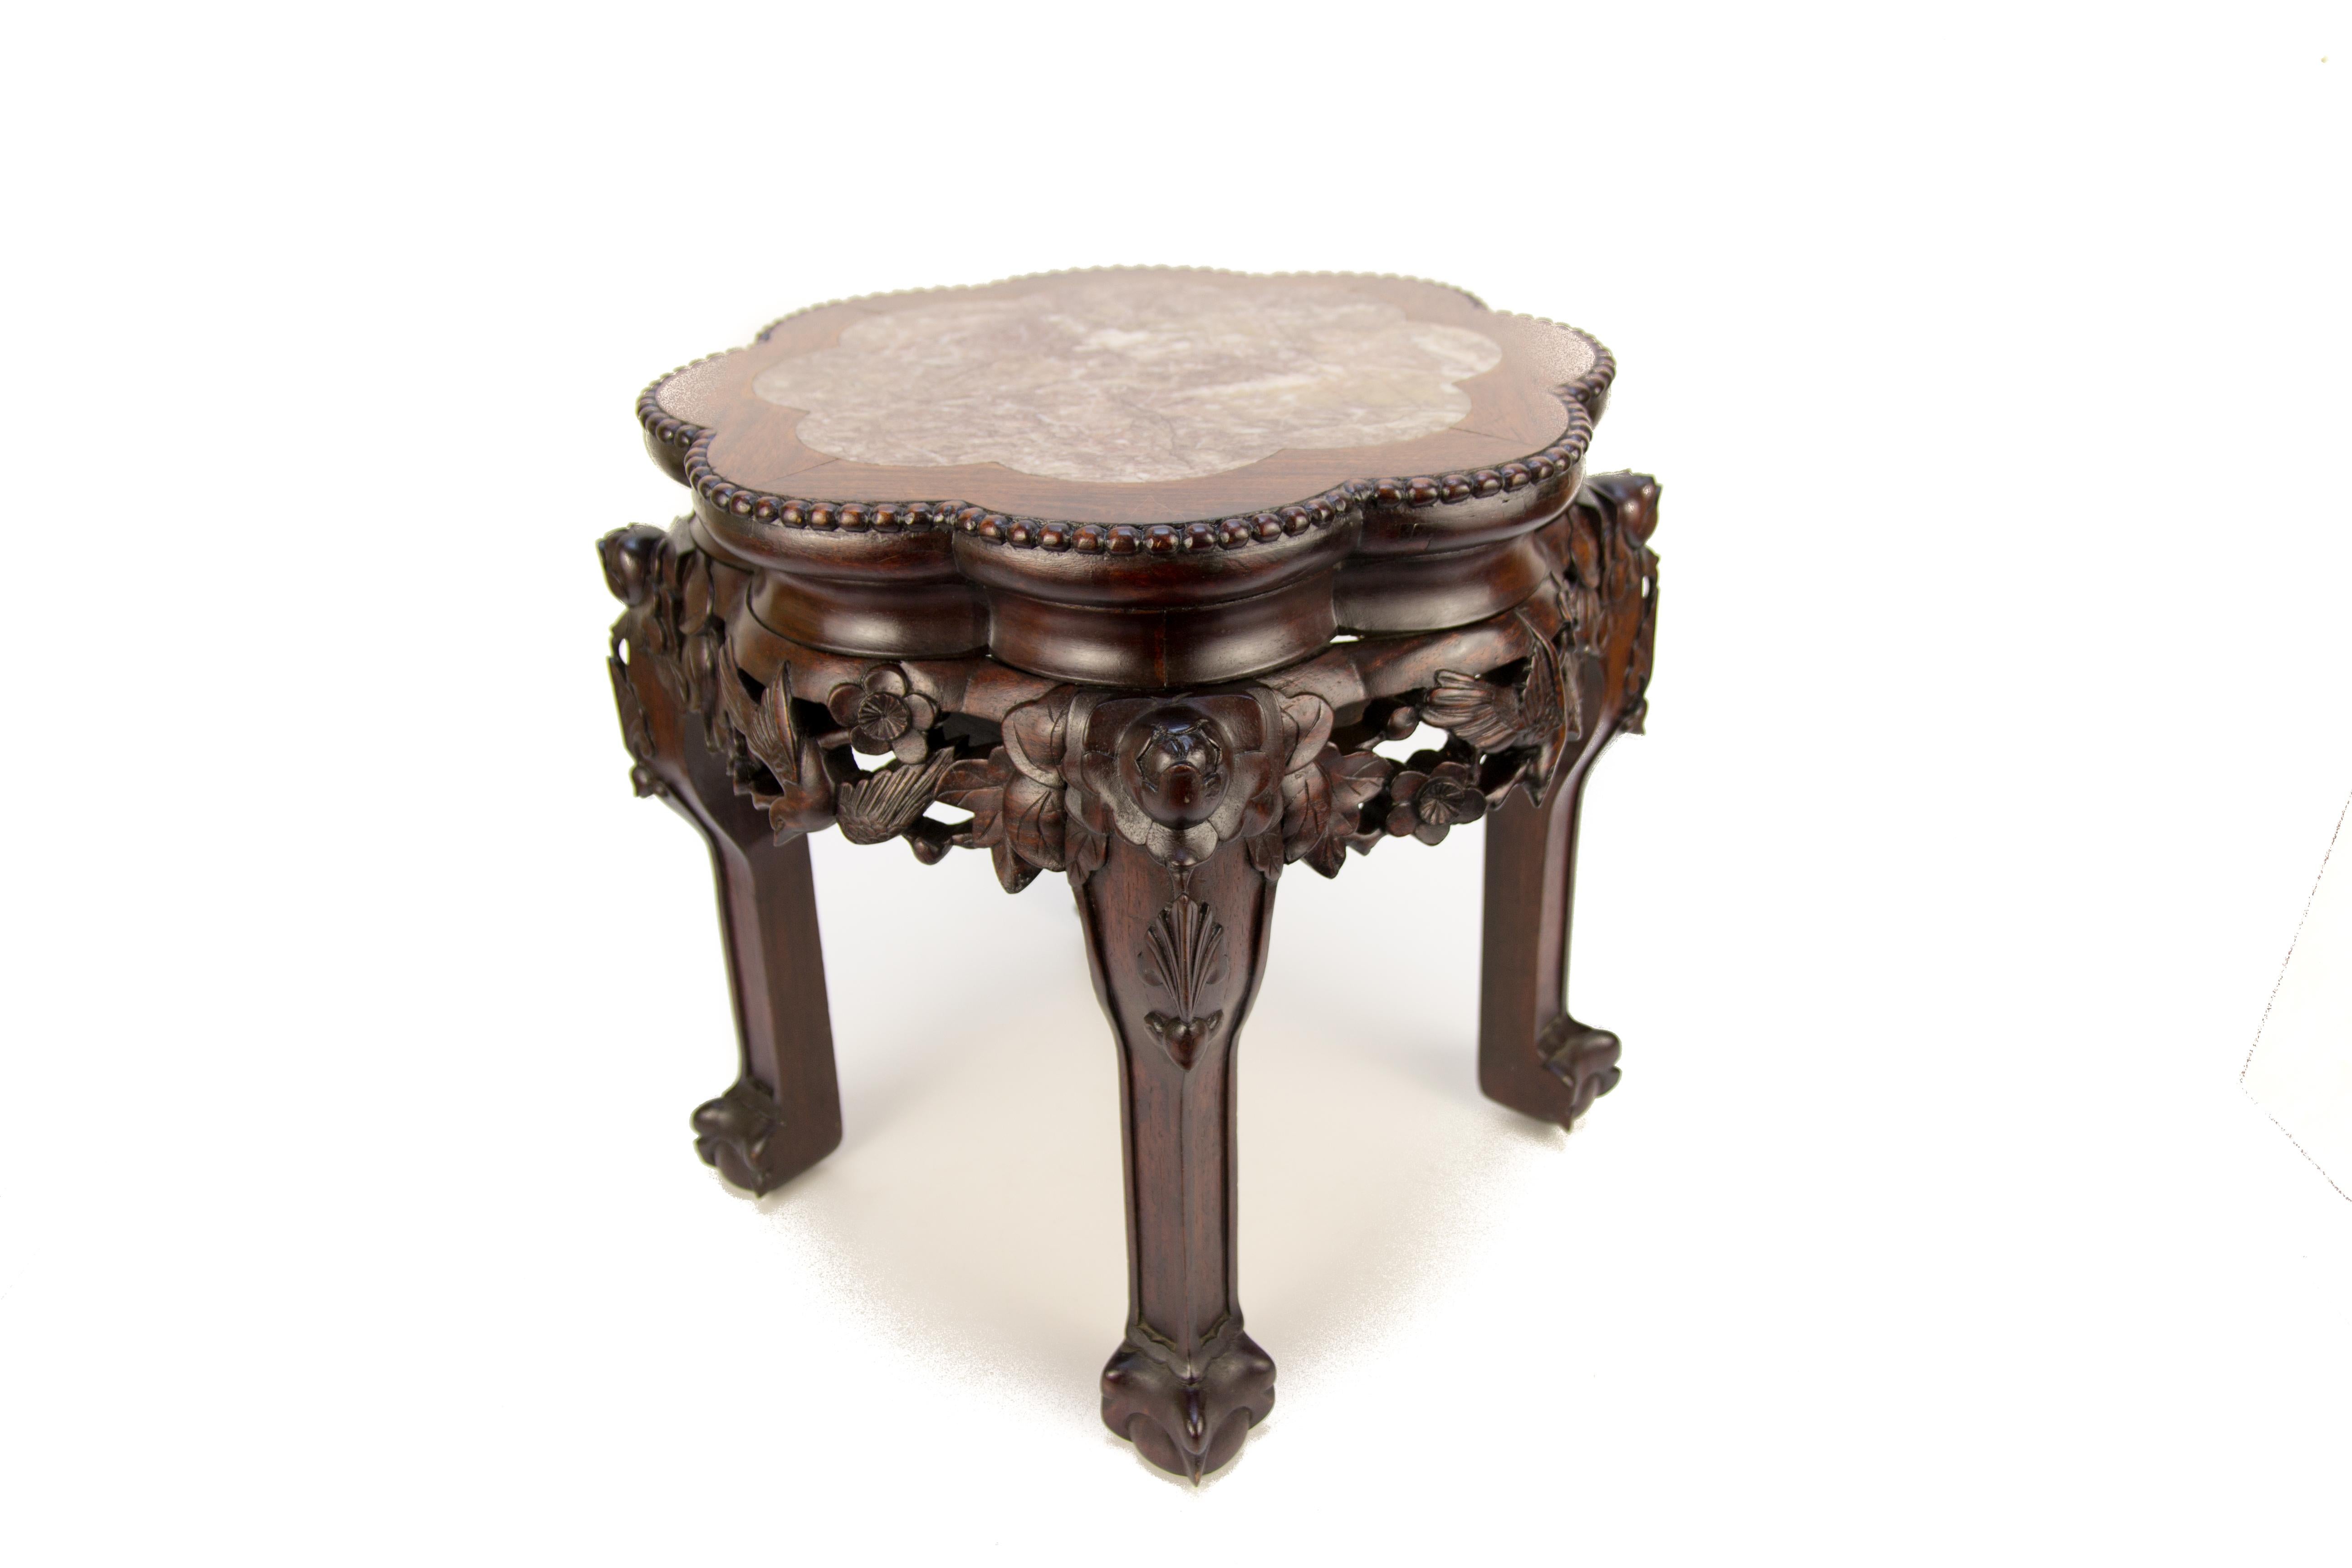 Chinese carved hardwood pot stand or small table with shaped marble inlaid top. Beautiful flower and bird carvings.
Measures: Diameter 45 cm / 17.7 in; height 38 cm / 15 in.